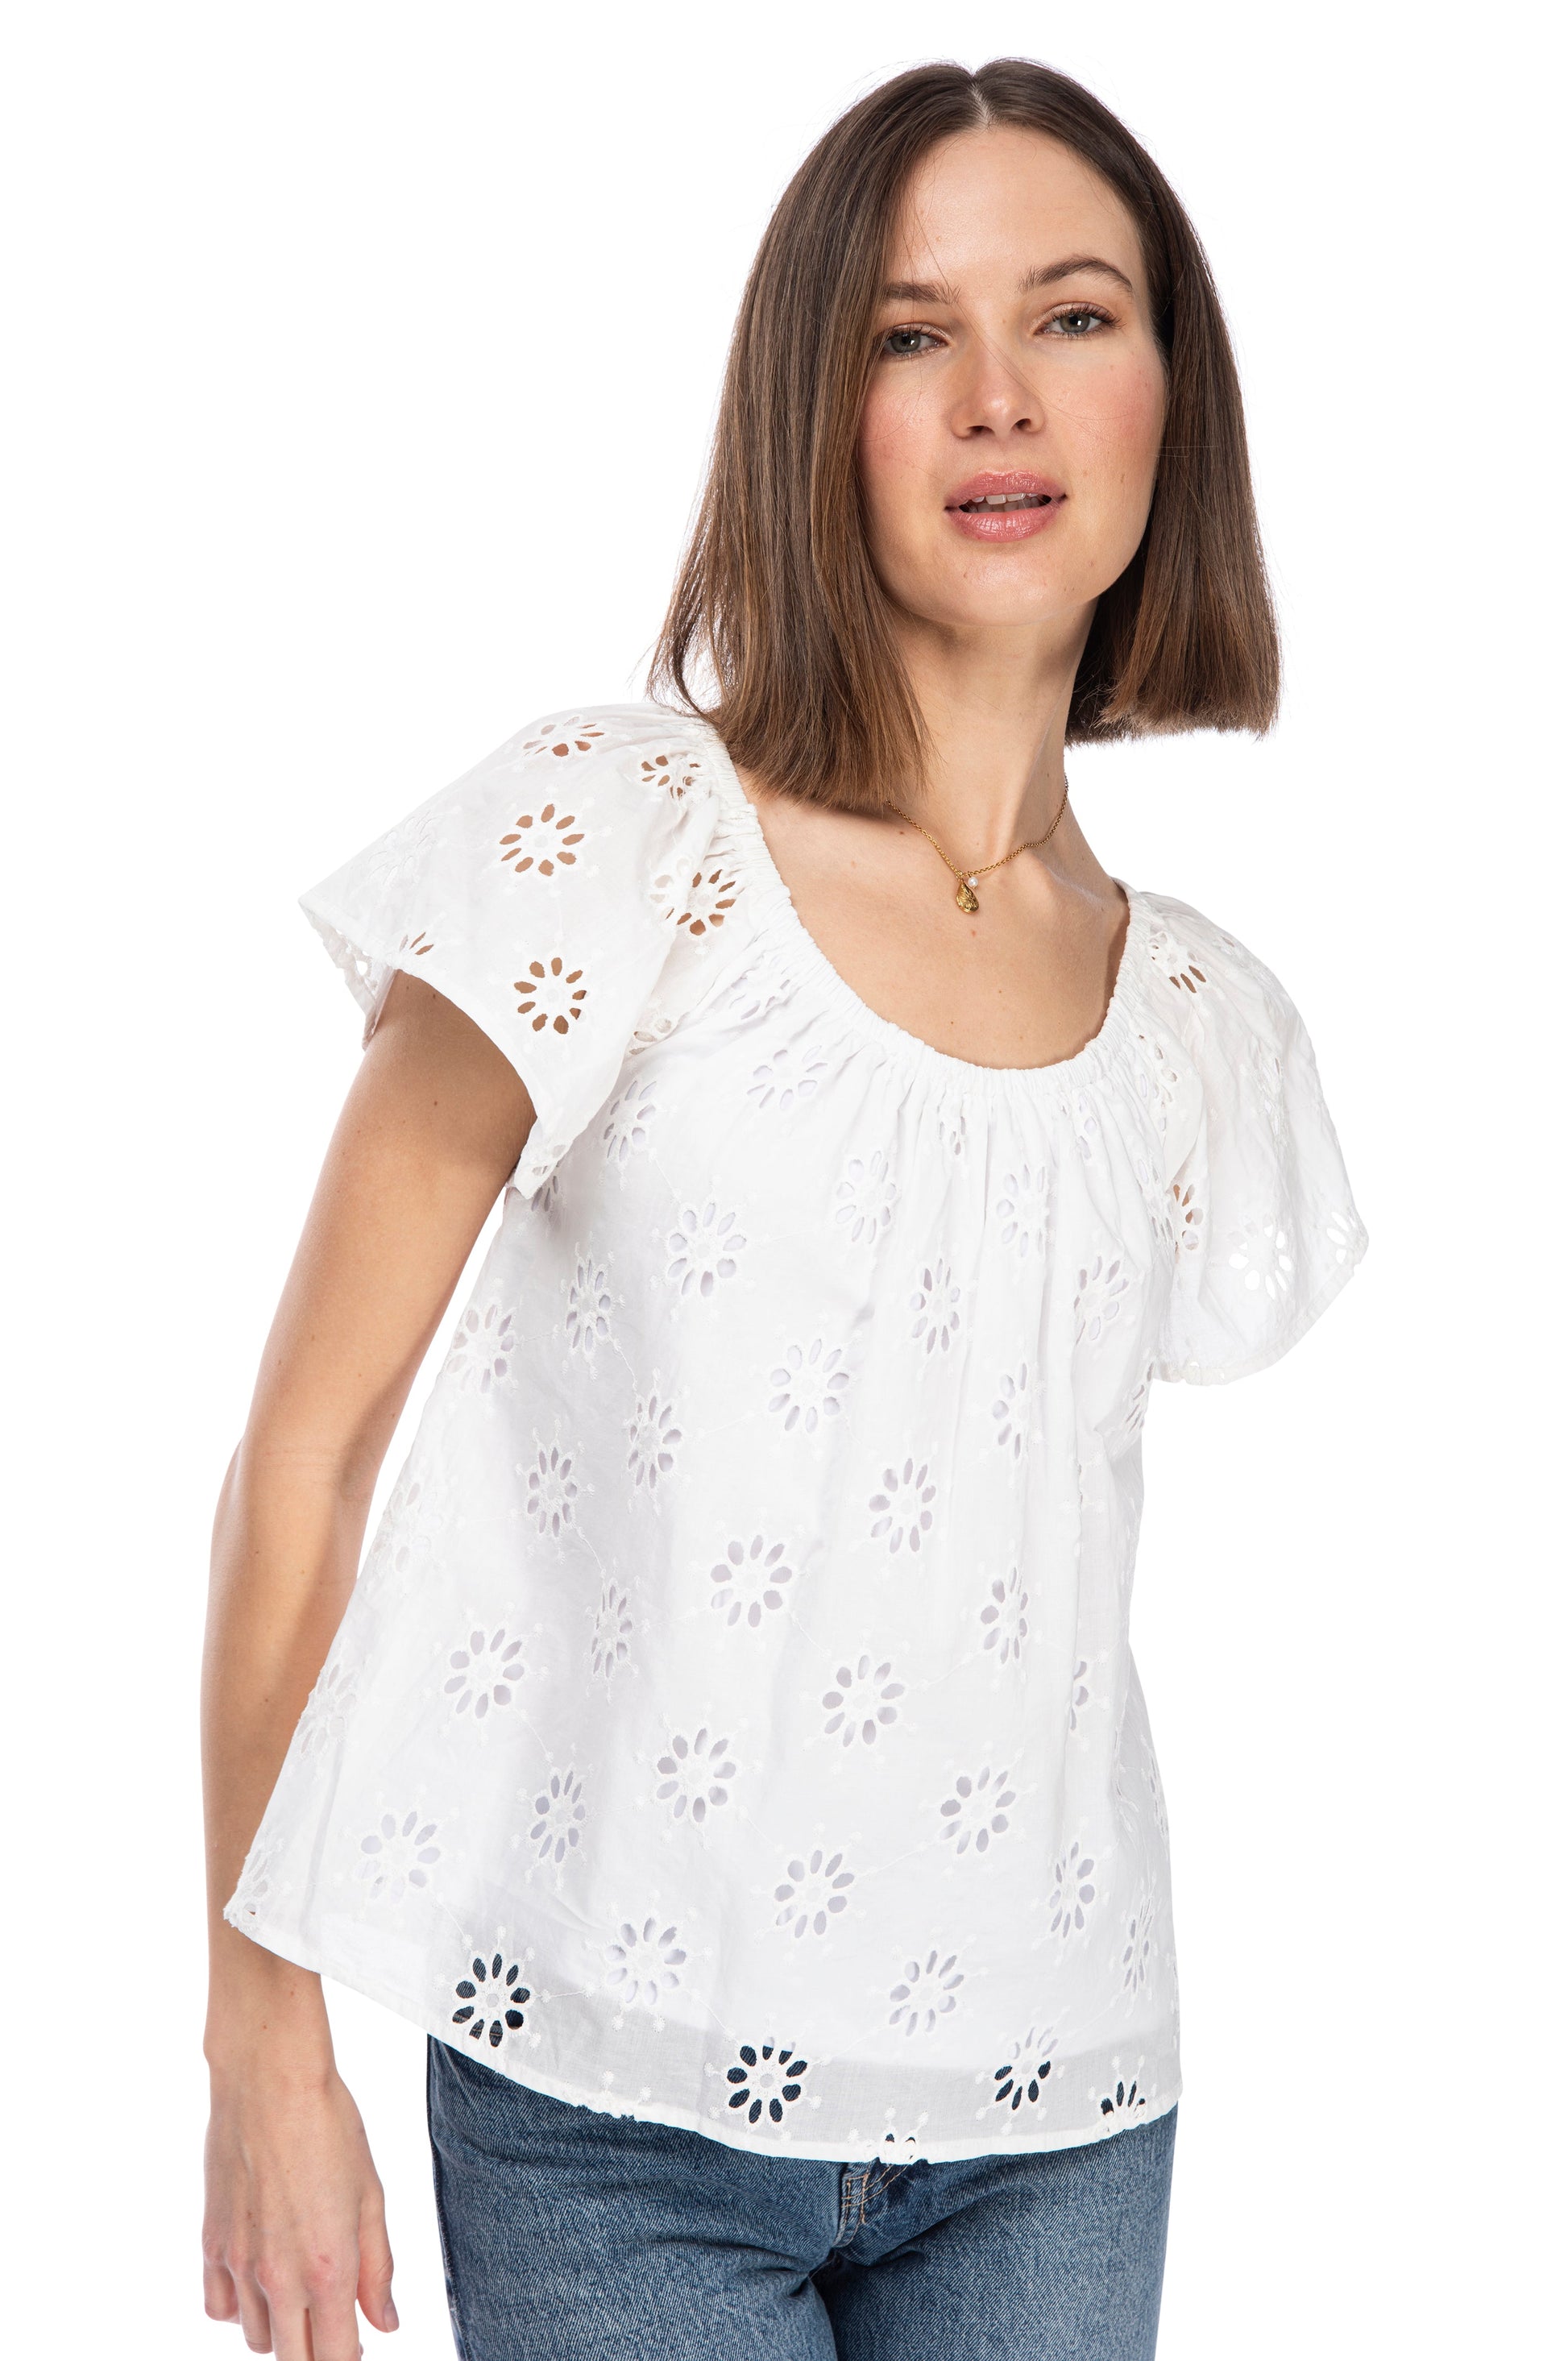 A woman wearing a B Collection by Bobeau SS PEASANT TOP, a 100% cotton, white blouse with floral cut-out patterns and an elastic neckline, looking directly at the camera with a neutral expression.